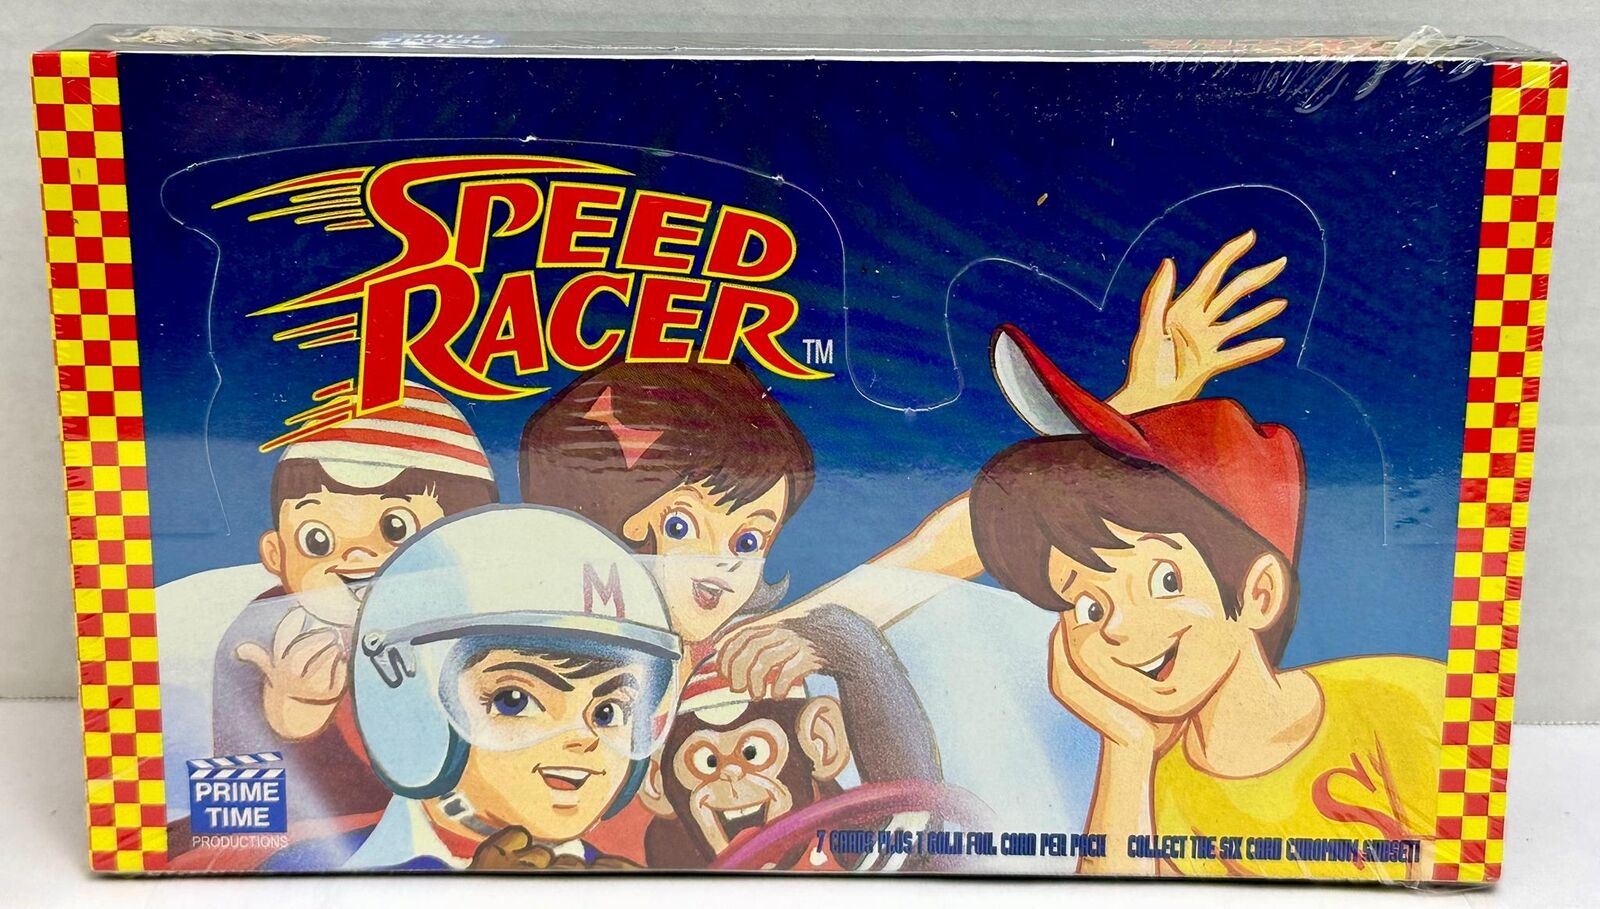 1993 Speed Racer Vintage Trading Card Box Prime Time Factory Sealed 36 Packs